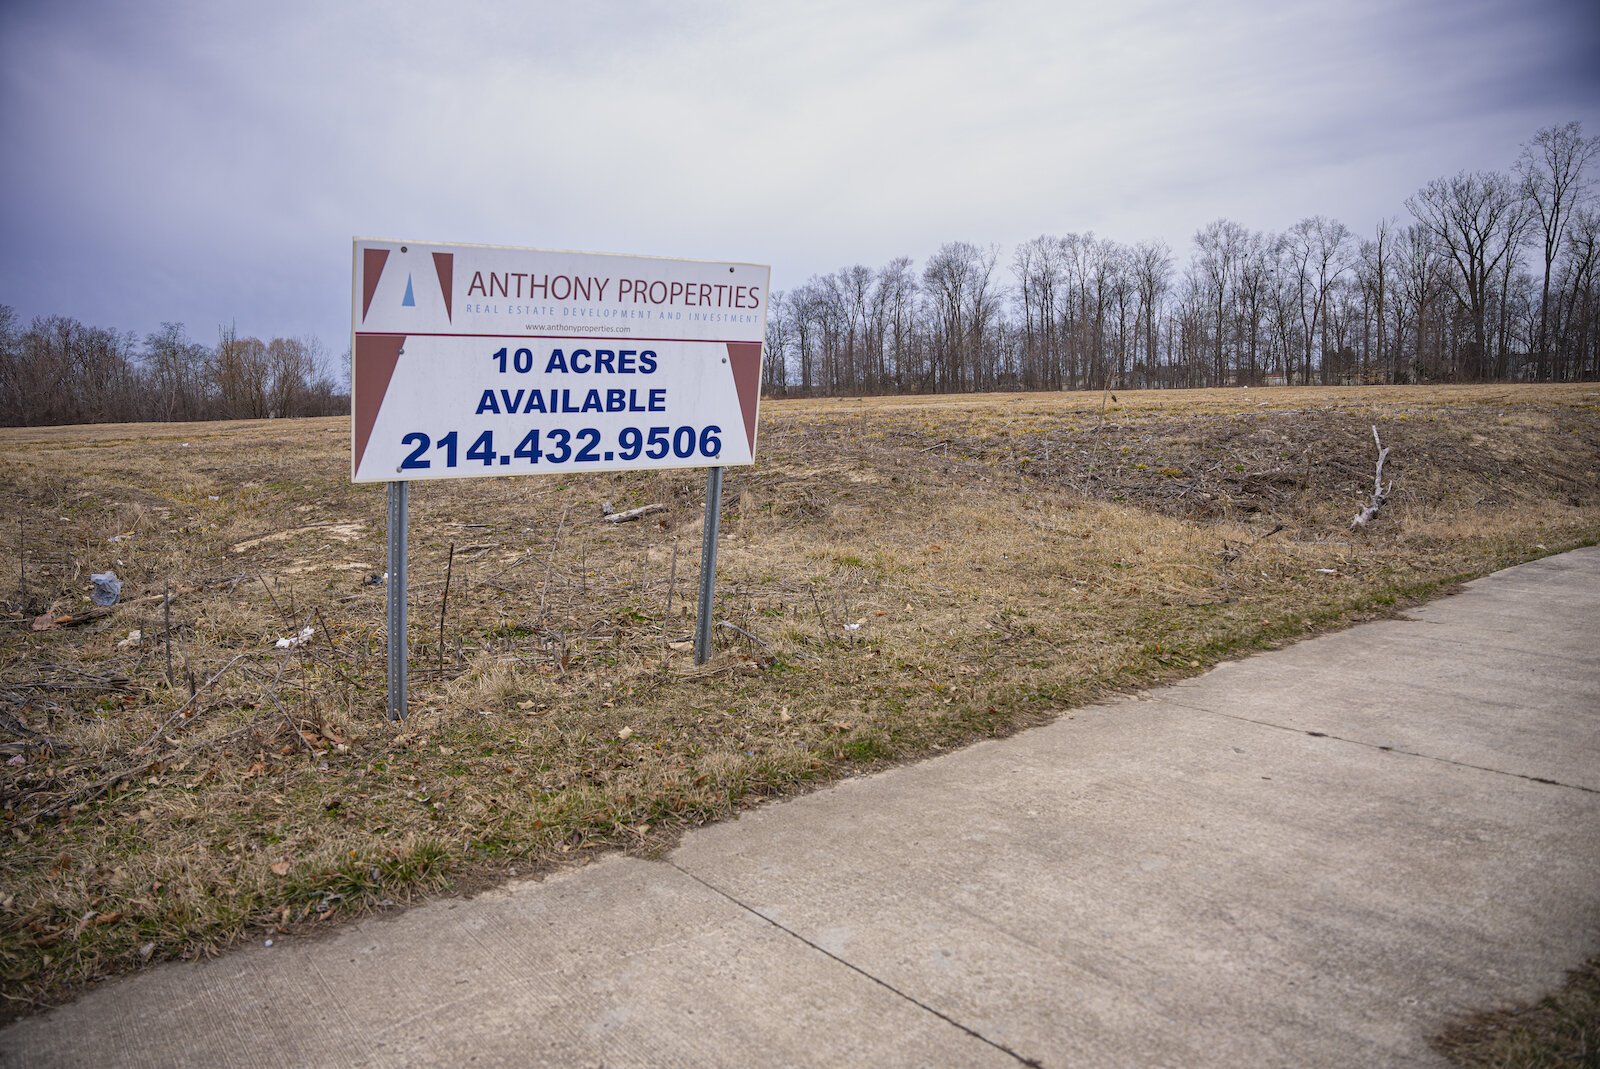 While vacant, undeveloped lots such as this still exist in the Northeast Quadrant, acquisition cost and recreation value also factor into whether a property is sought by the Parks and Recreation Department.